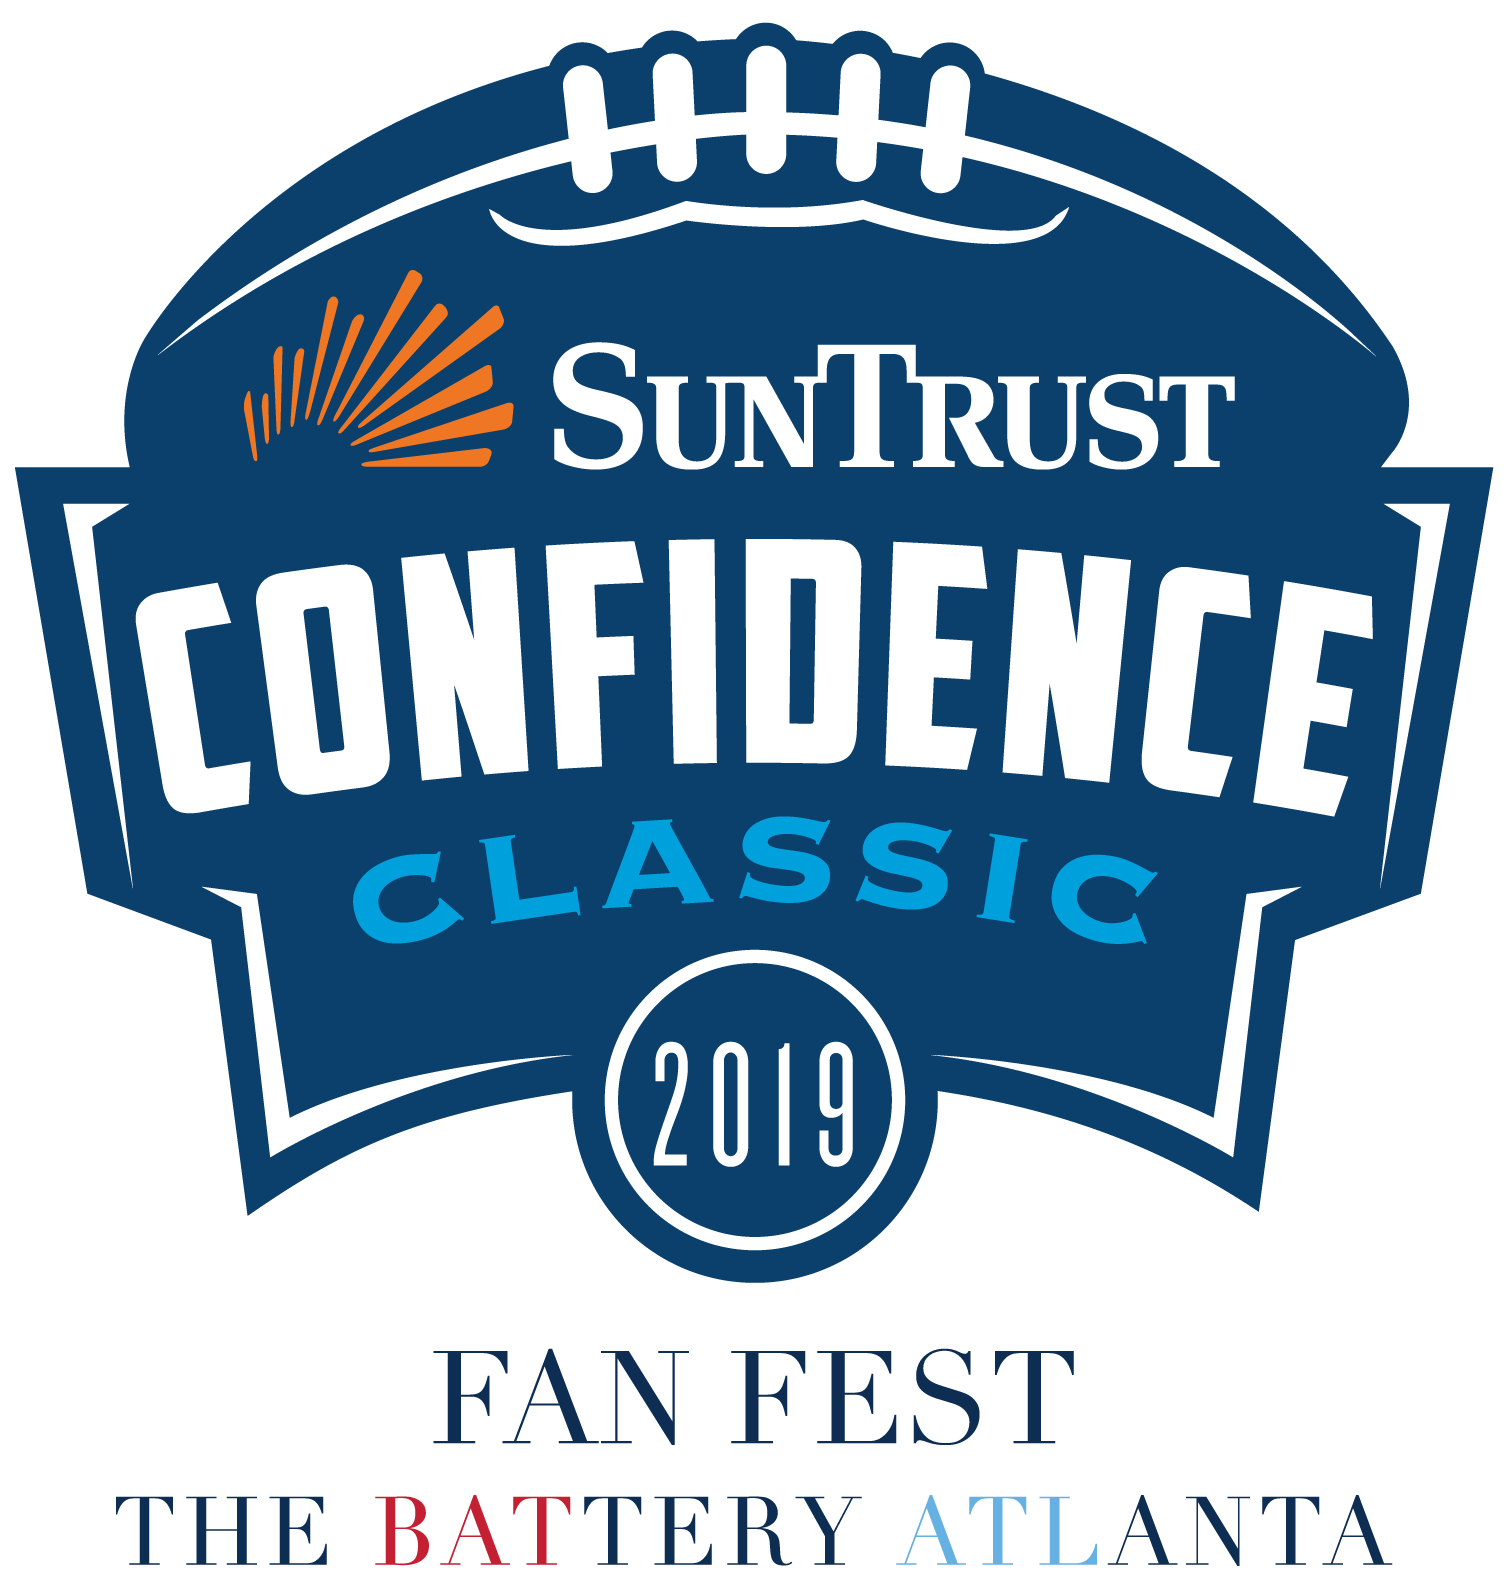 Head to Fan Fest at the Battery Atlanta This Weekend